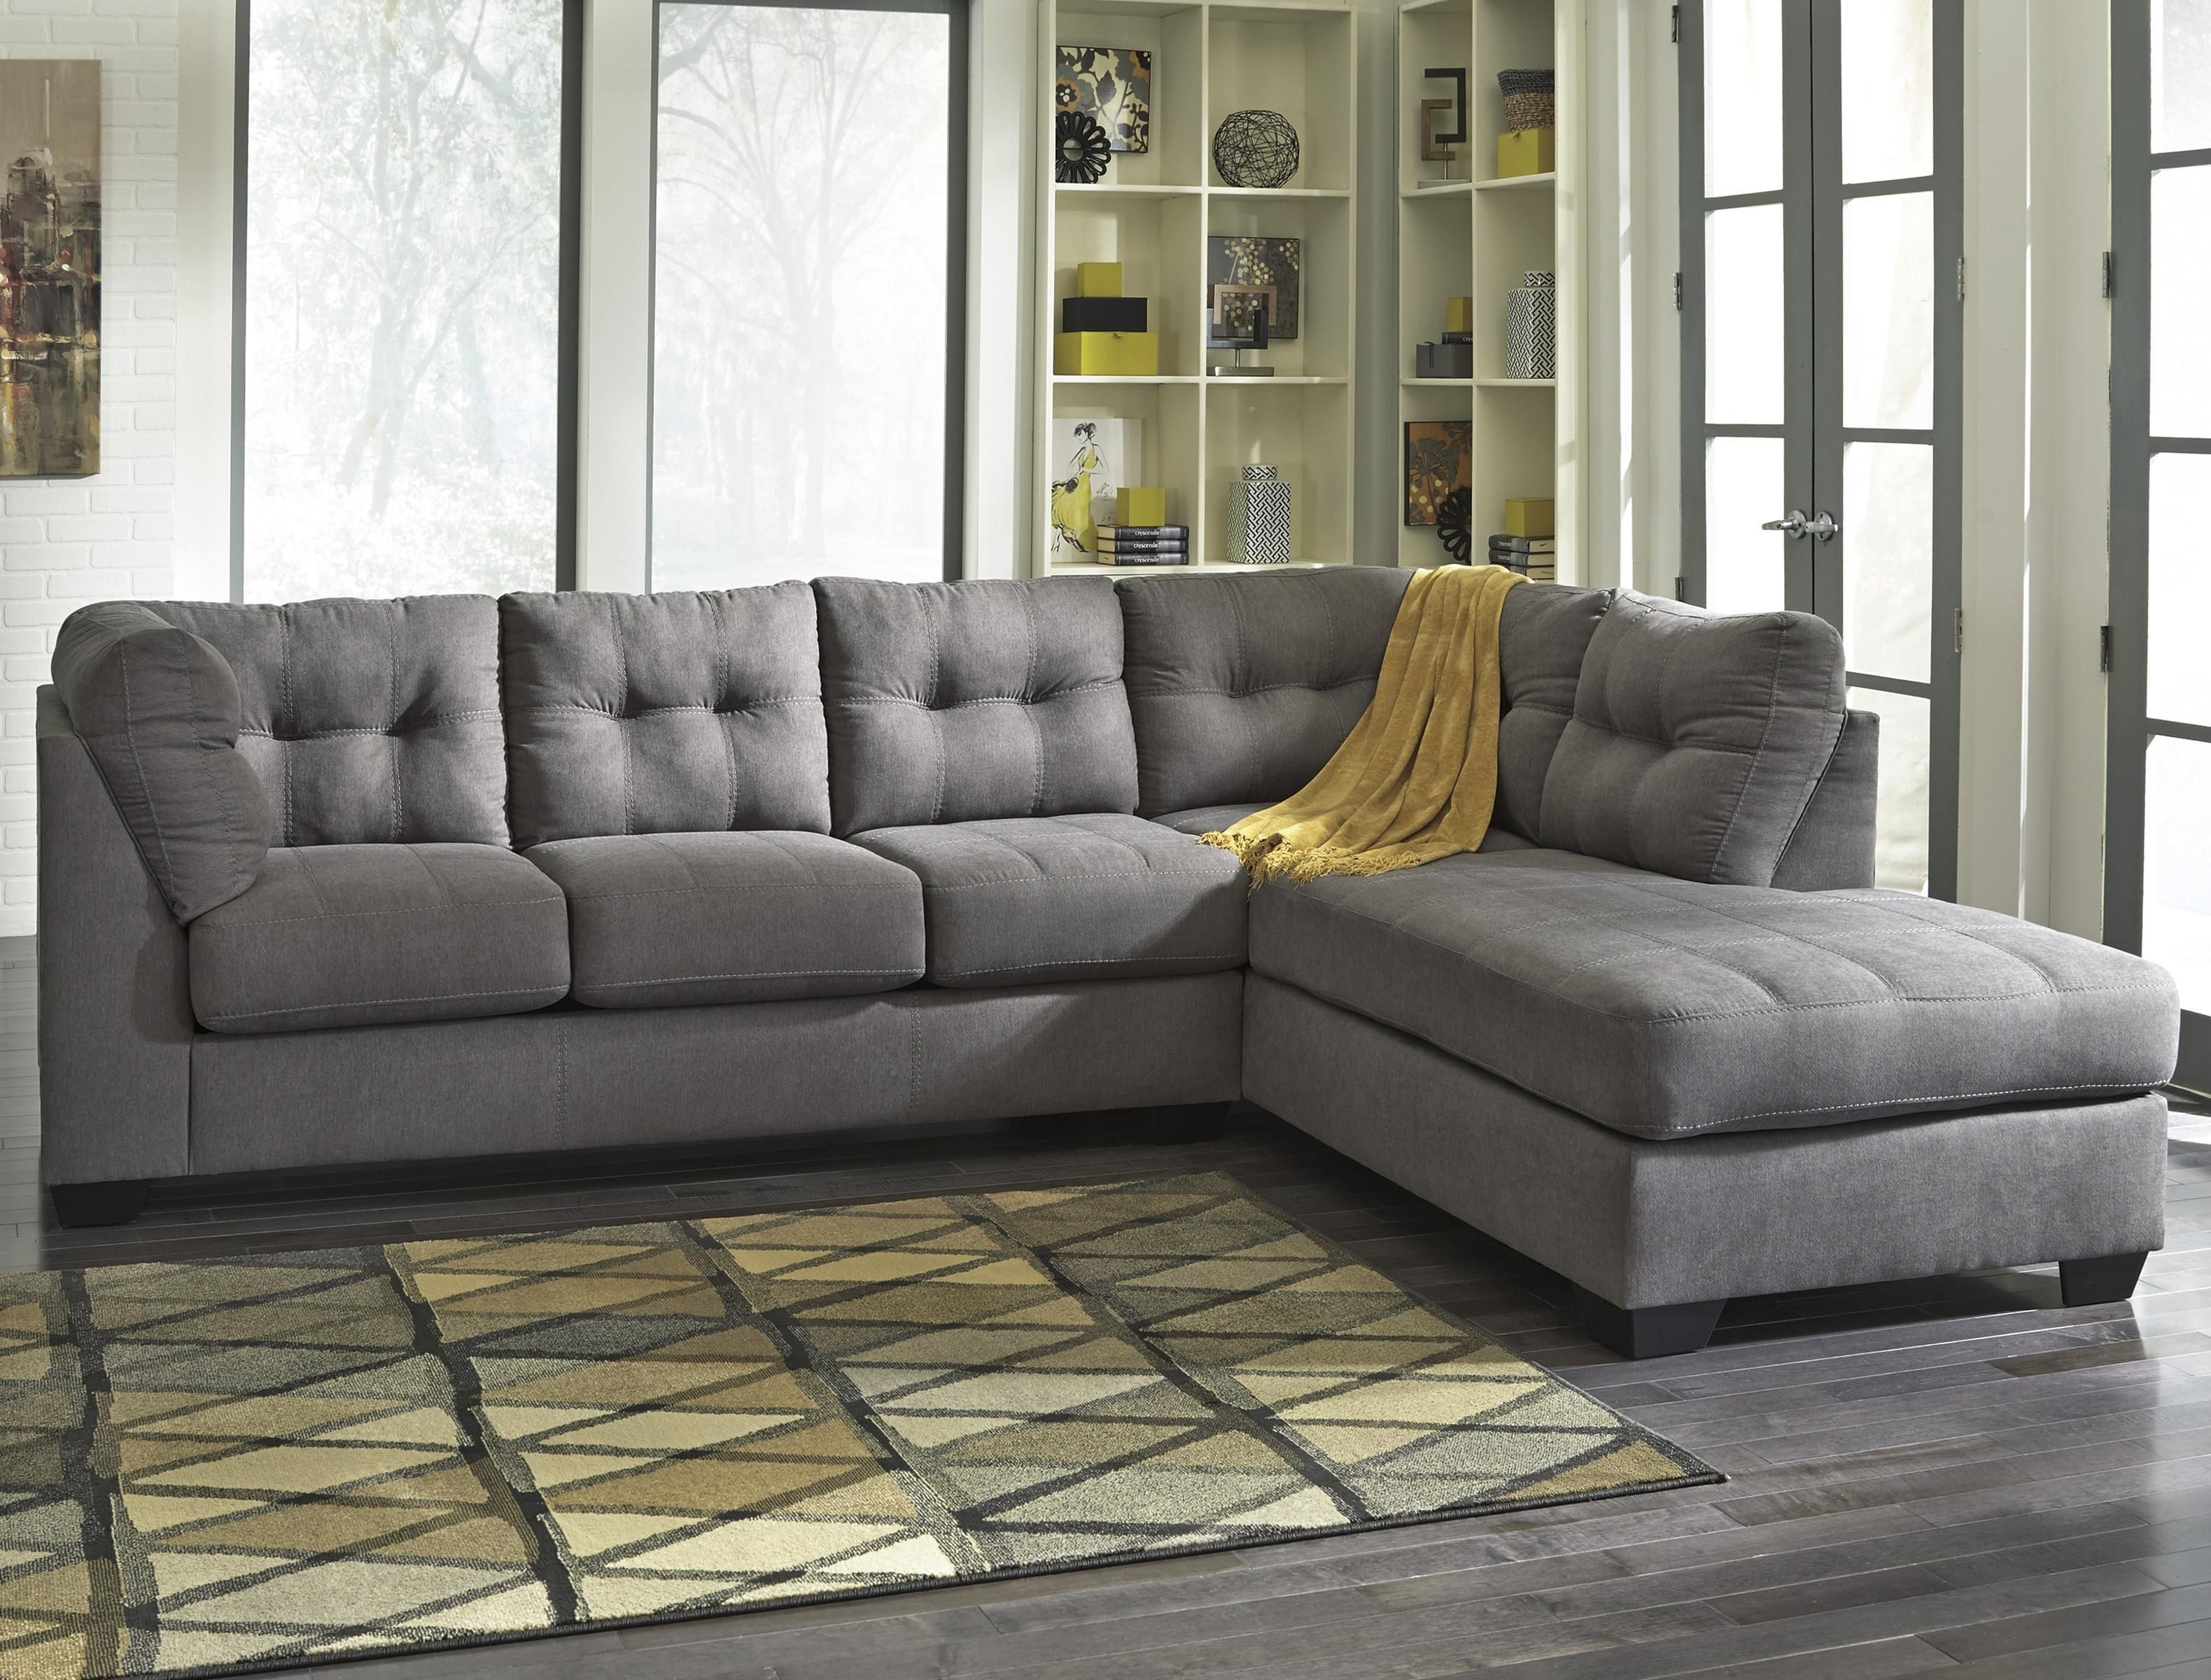 Benchcraft Maier – Charcoal 2 Piece Sectional With Right Chaise Throughout East Bay Sectional Sofas (View 4 of 10)